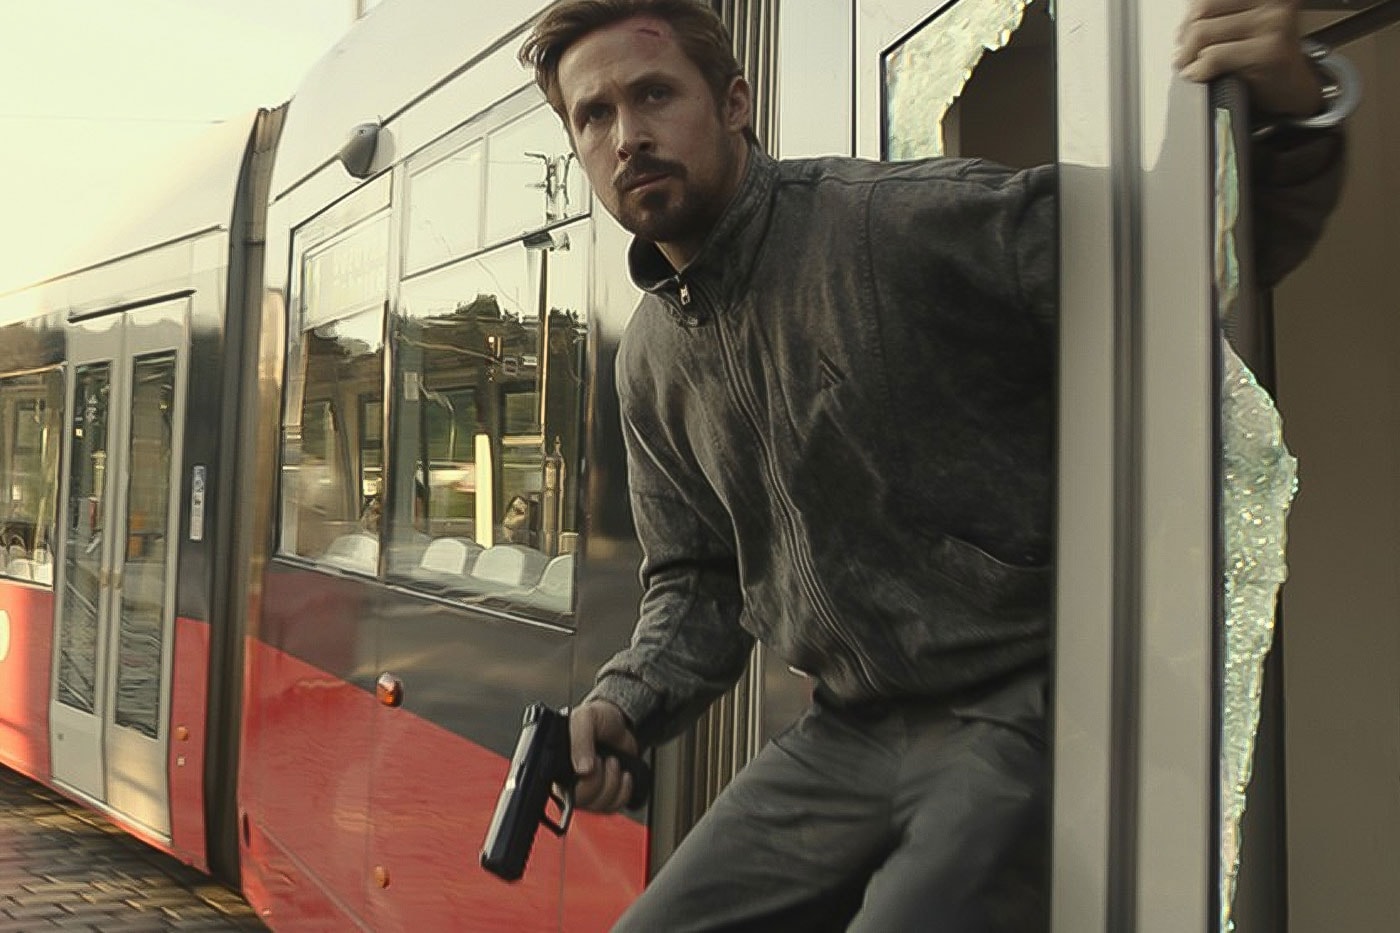 Netflix Releases First Look Images at Russo Brothers' Upcoming Film 'The Gray Man' Starring Ryan Gosling, Chris Evans, Ana de Armas and Regé-Jean Page